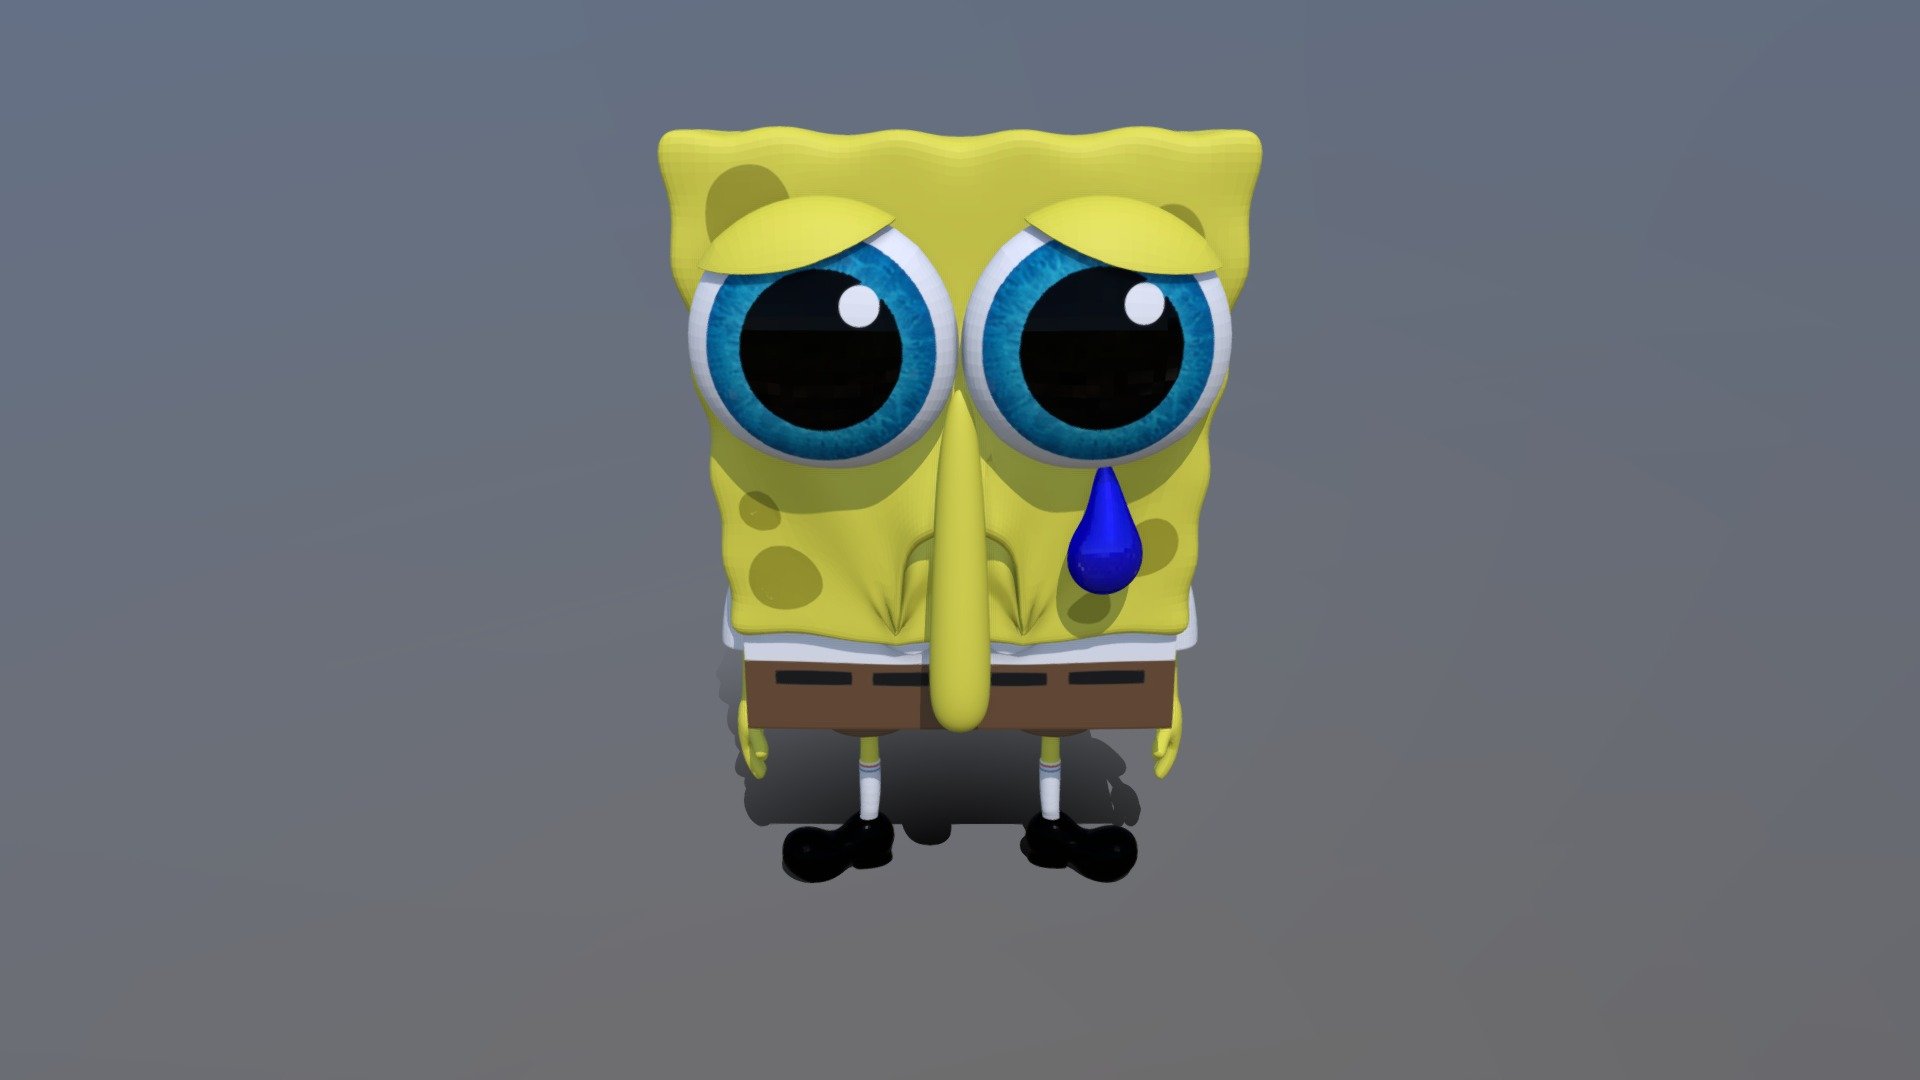 ah hell nah i know they didnt make spanch blorp into a 3d module
This model is an edited version of the Spongebob model in BFBB Rehydrated - Spunch Bop - 3D model by BooplesnootyAgain (@boopsssy) 3d model